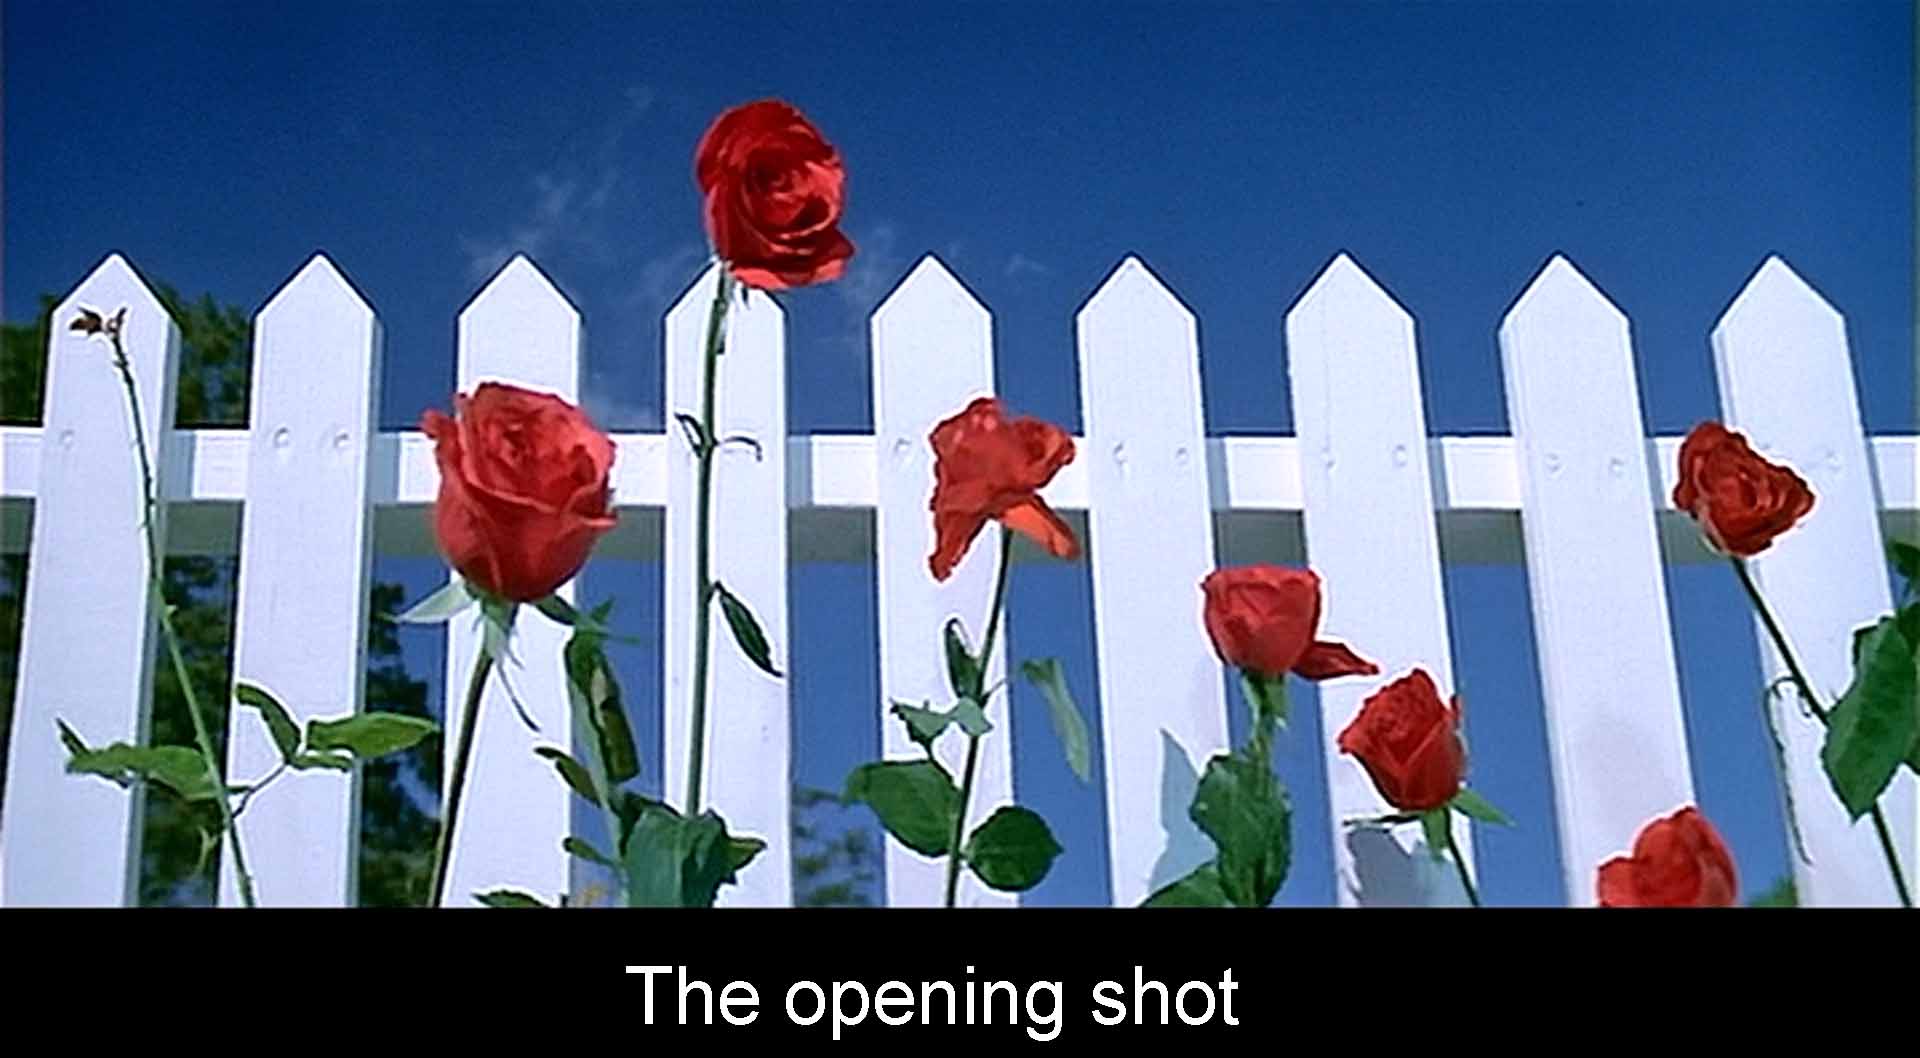 The opening red roses